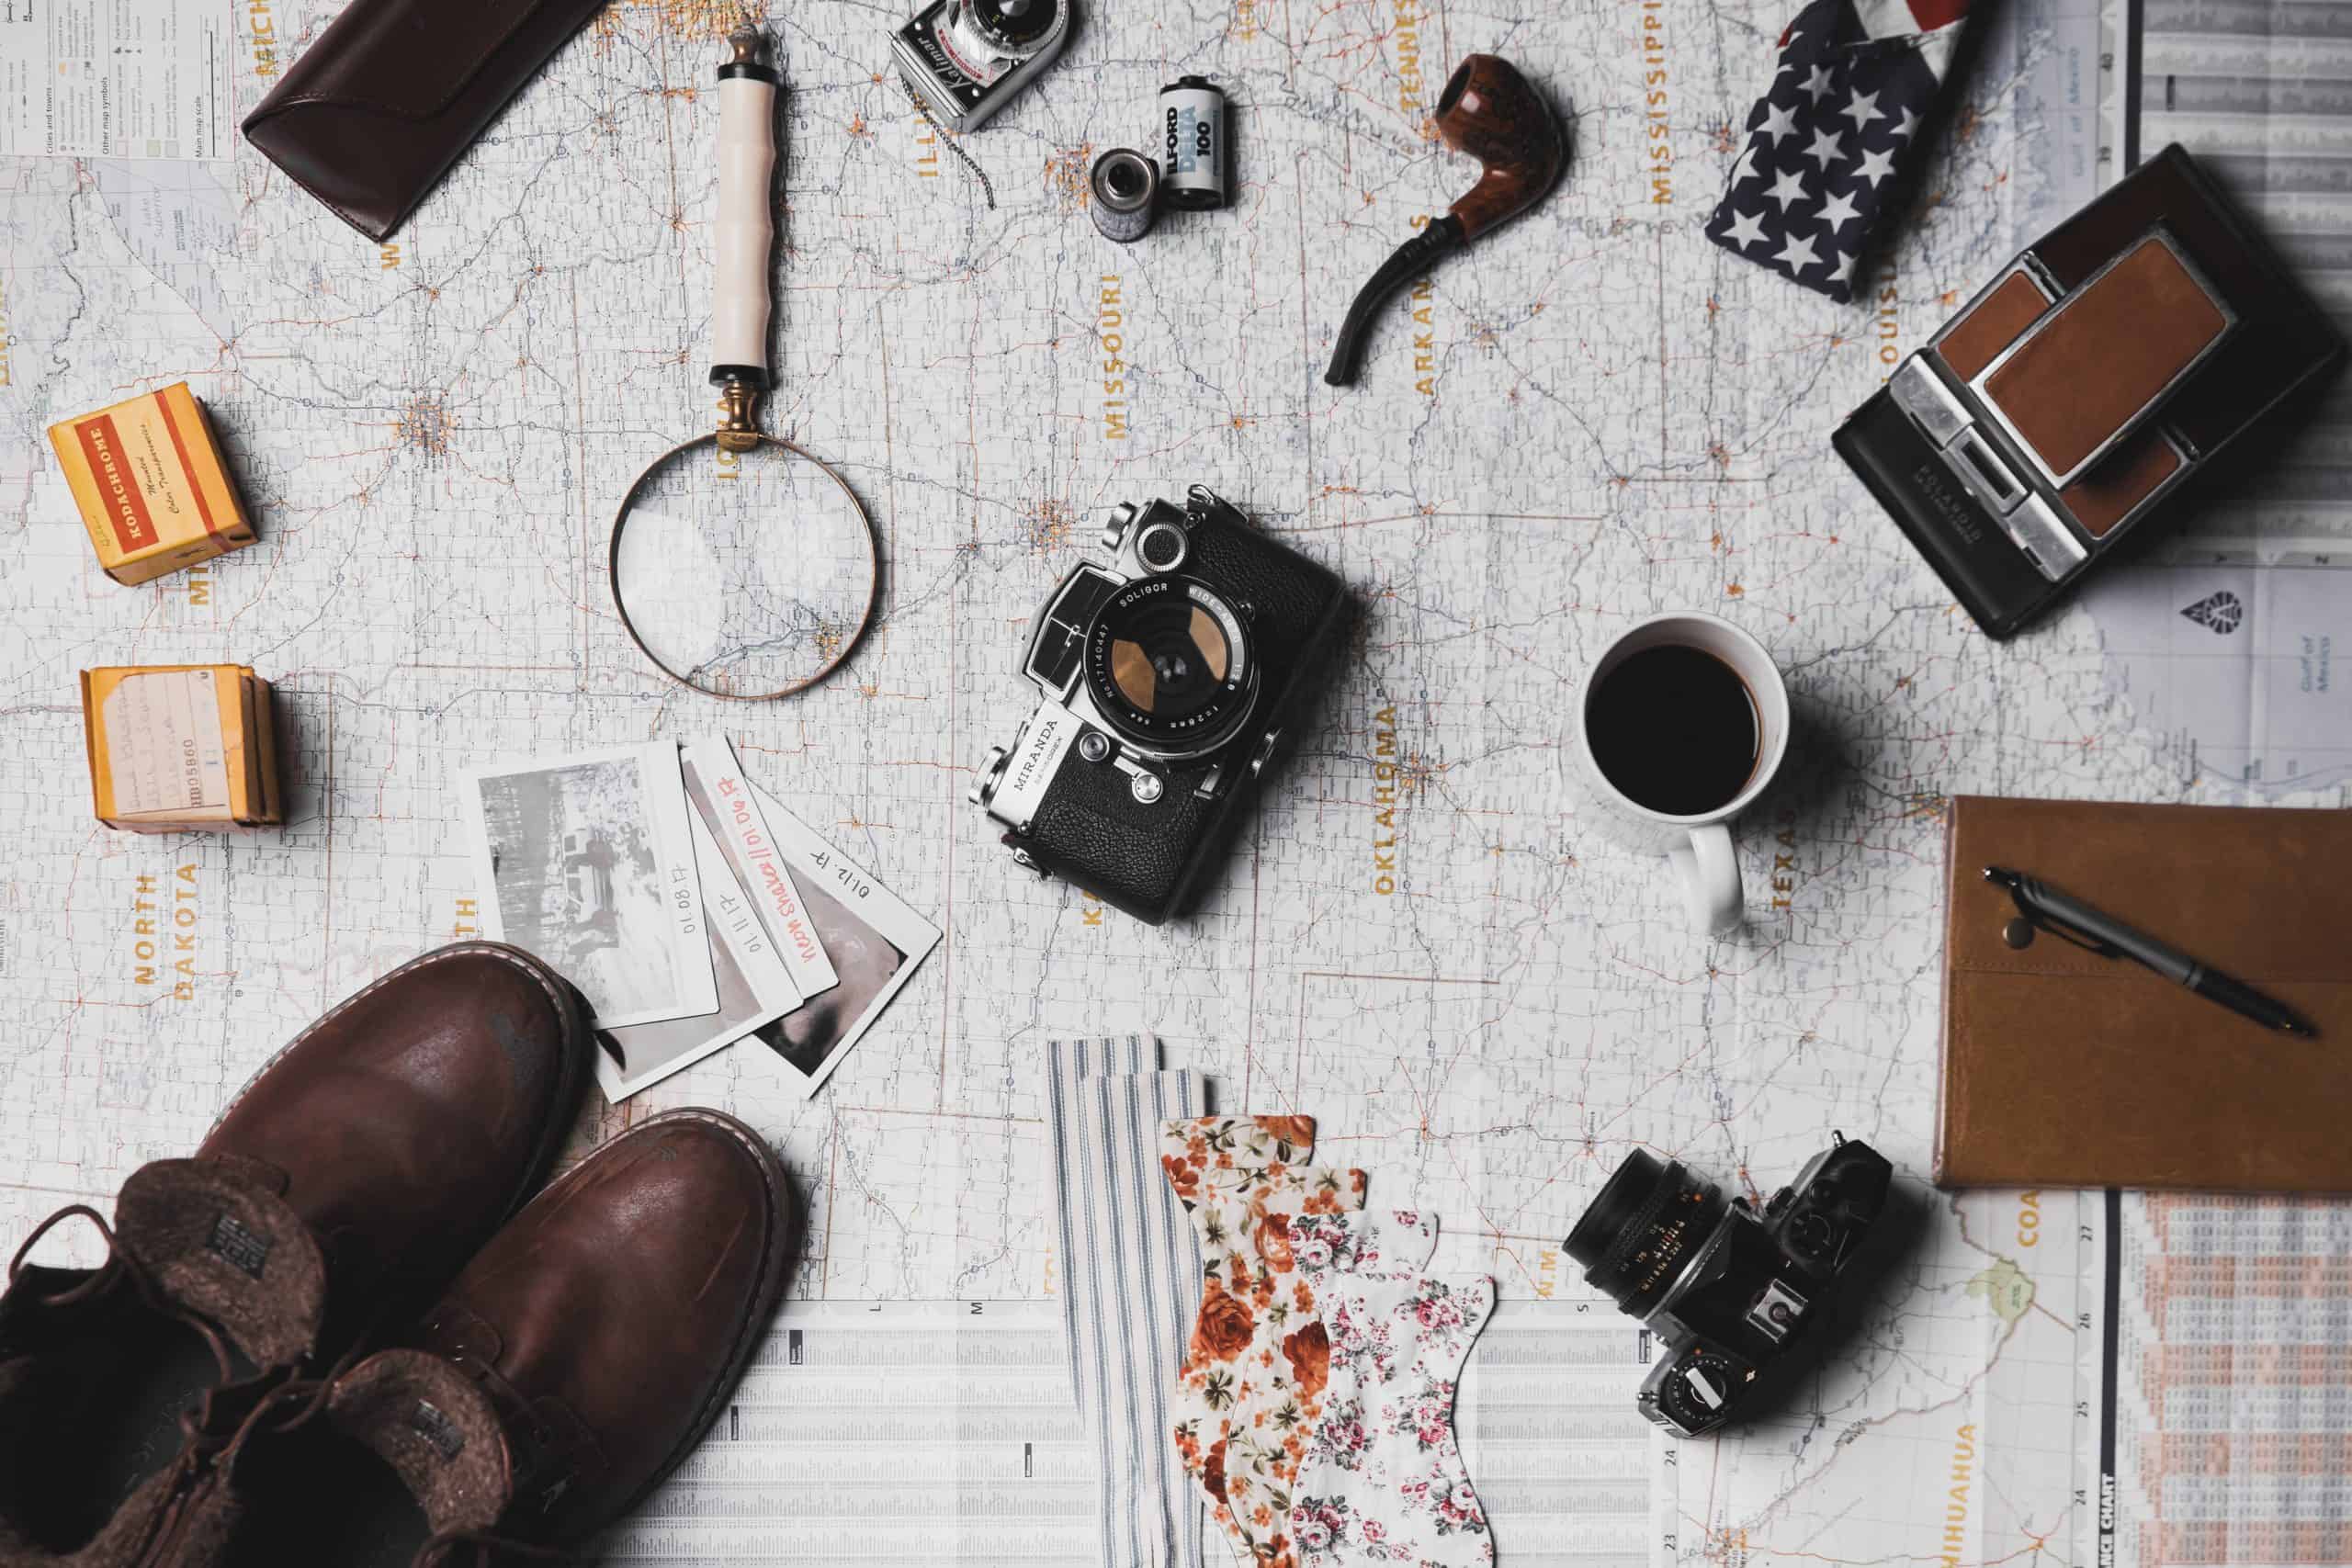 Travel and photography essentials laid out on a map, including a vintage camera, lenses, notebook, and a cup of coffee.